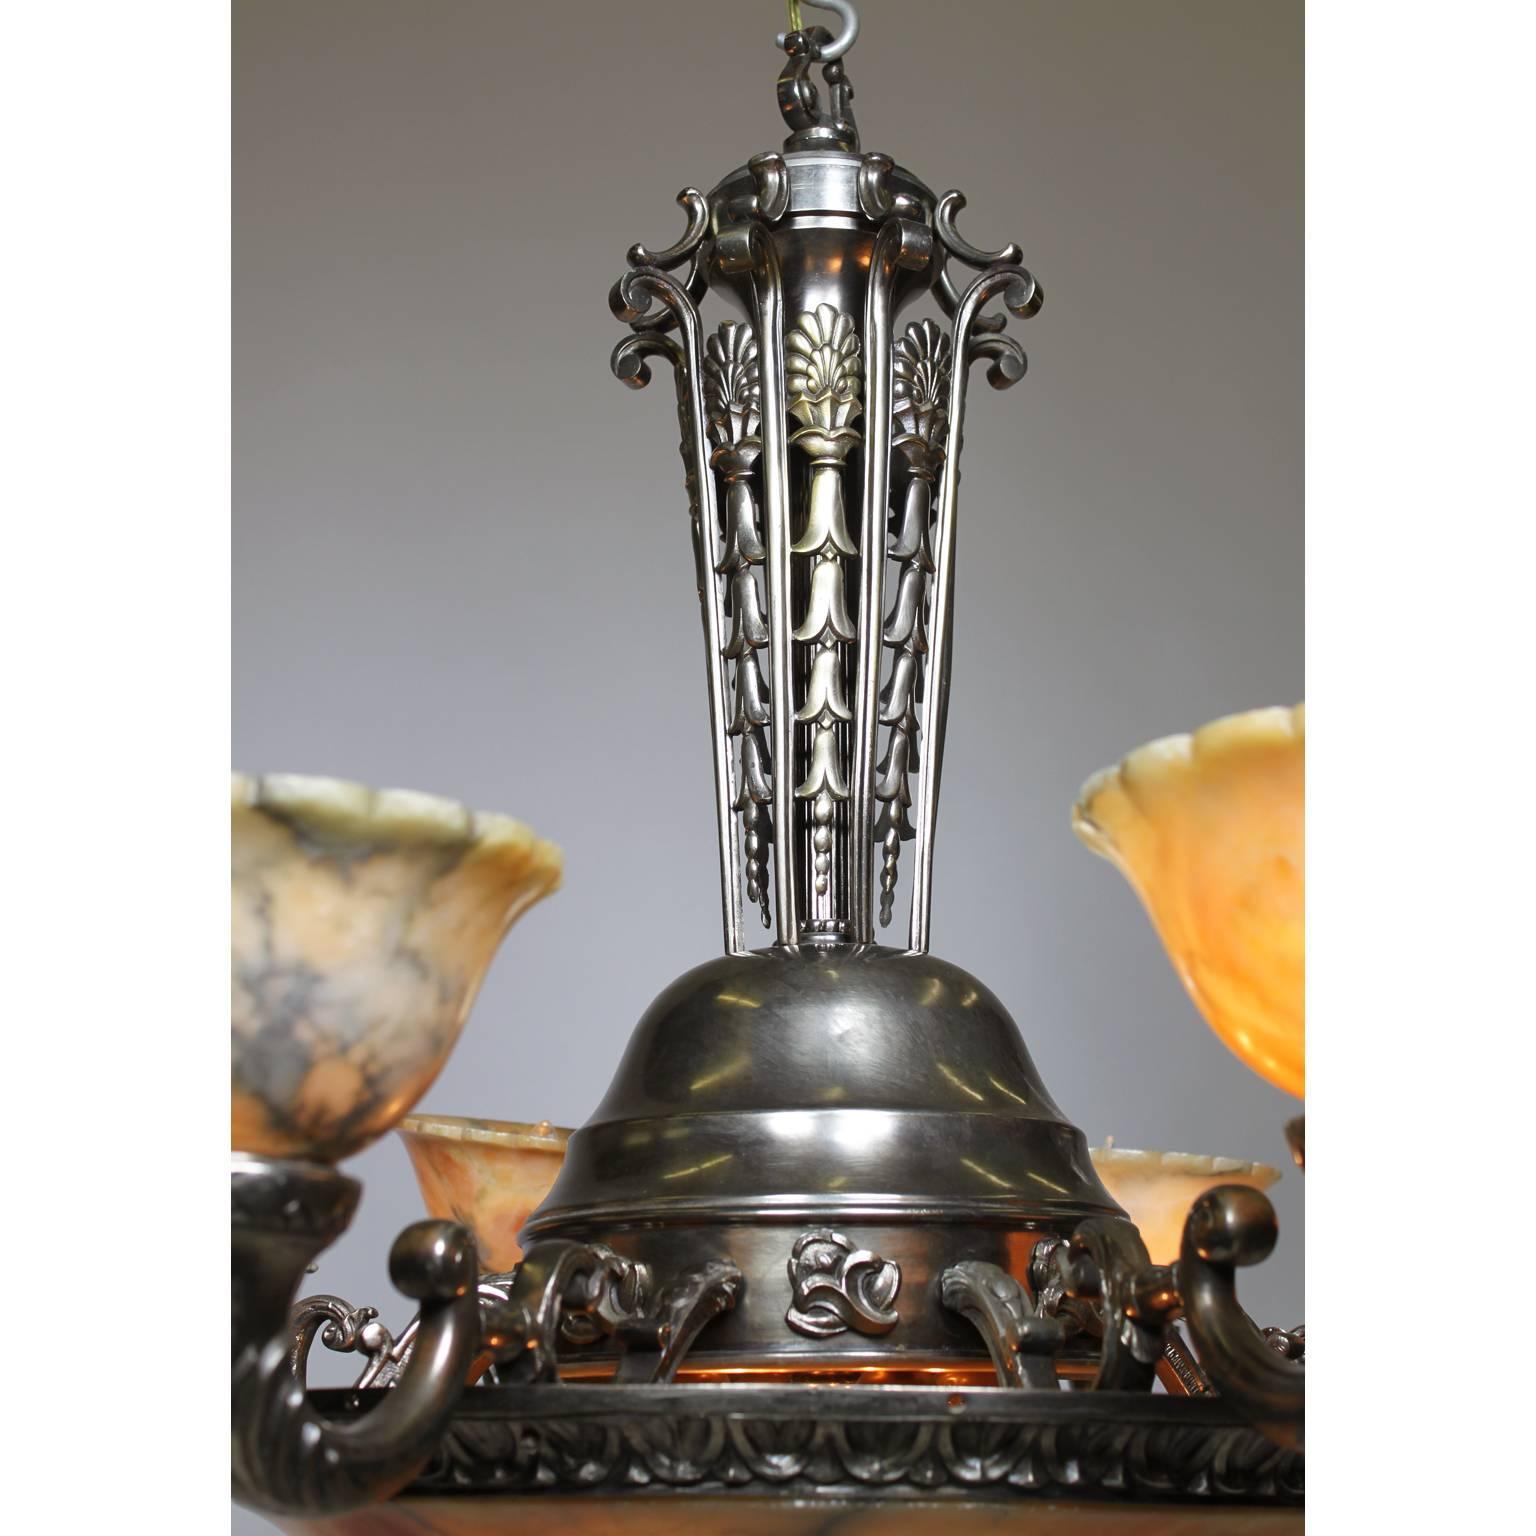 A French early 20th century Art-Deco silvered bronze and carved caramel-colored alabaster eight-light chandelier. The intricate pierced floral strand cone-shaped stem supporting a circular plateau surmounted with eight scrolled cornucopia